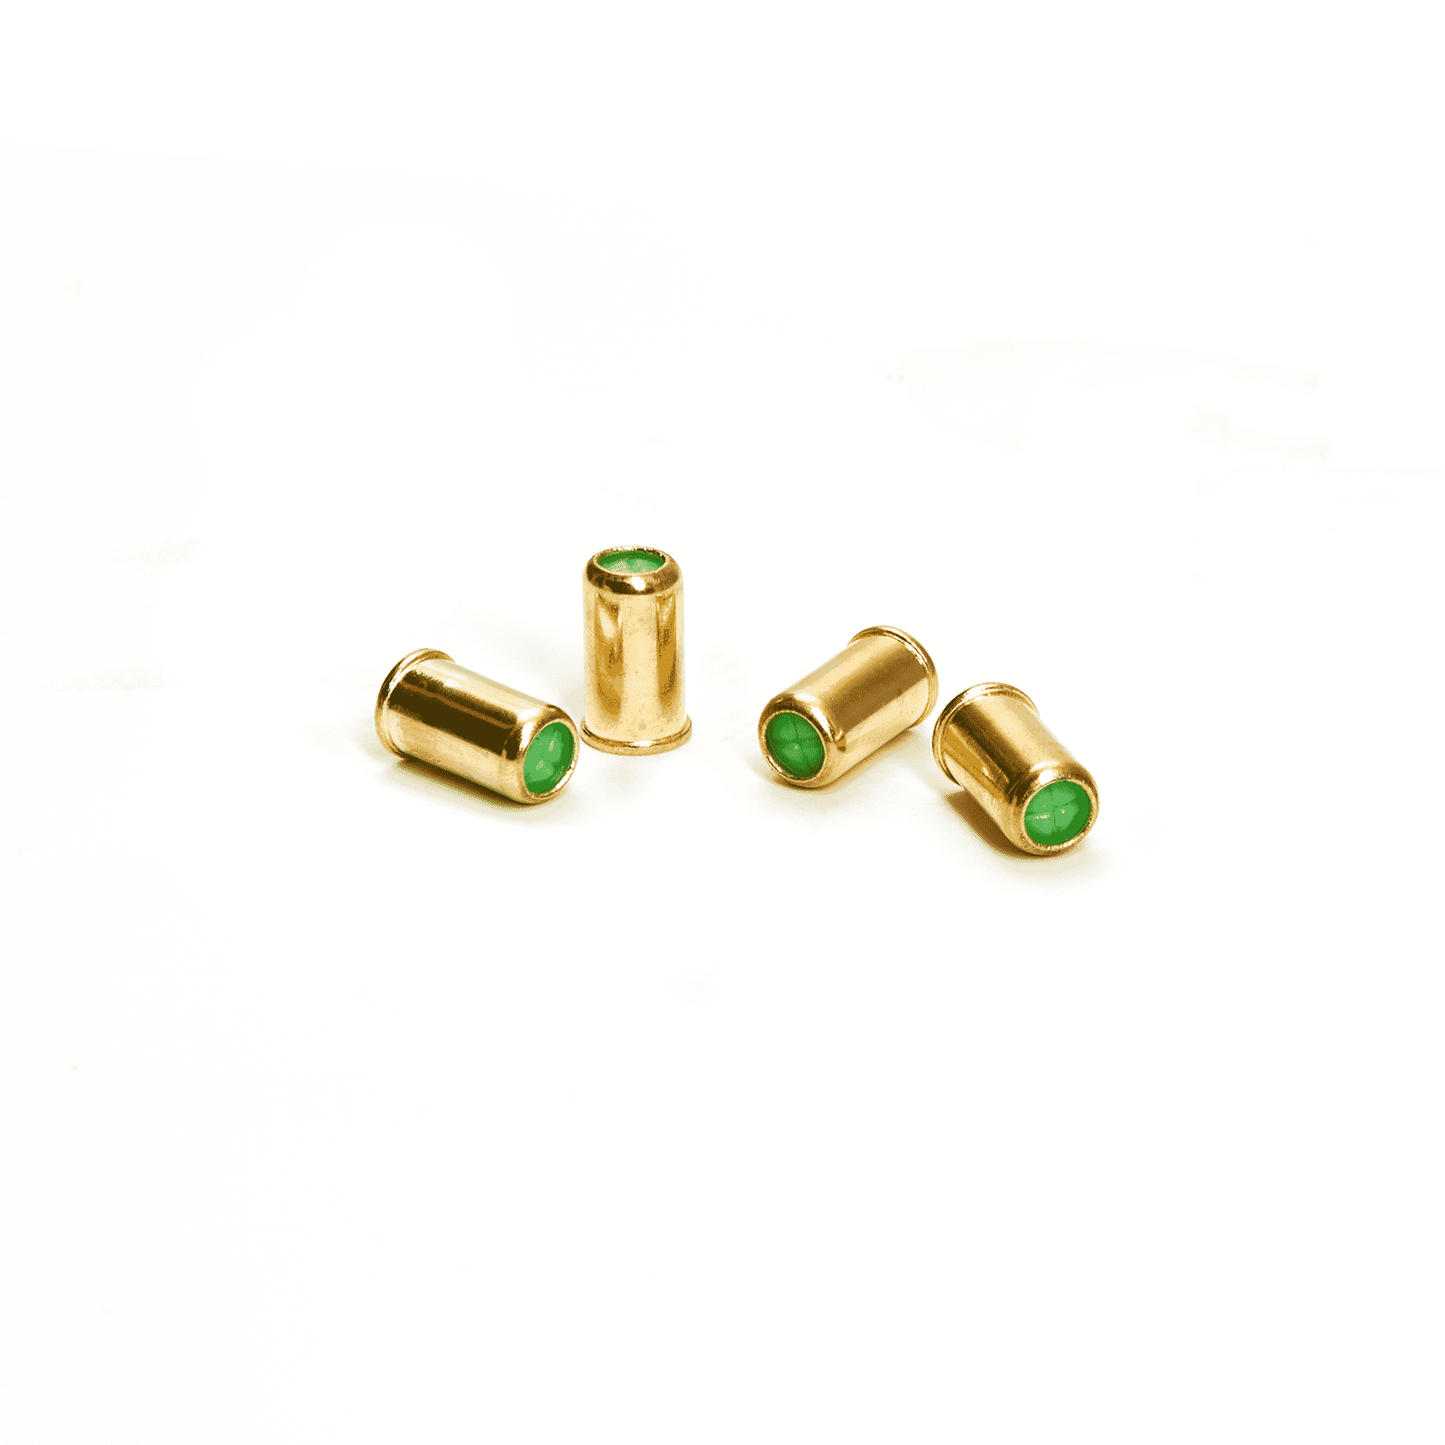 picture of the brass cased blank bullets with green end